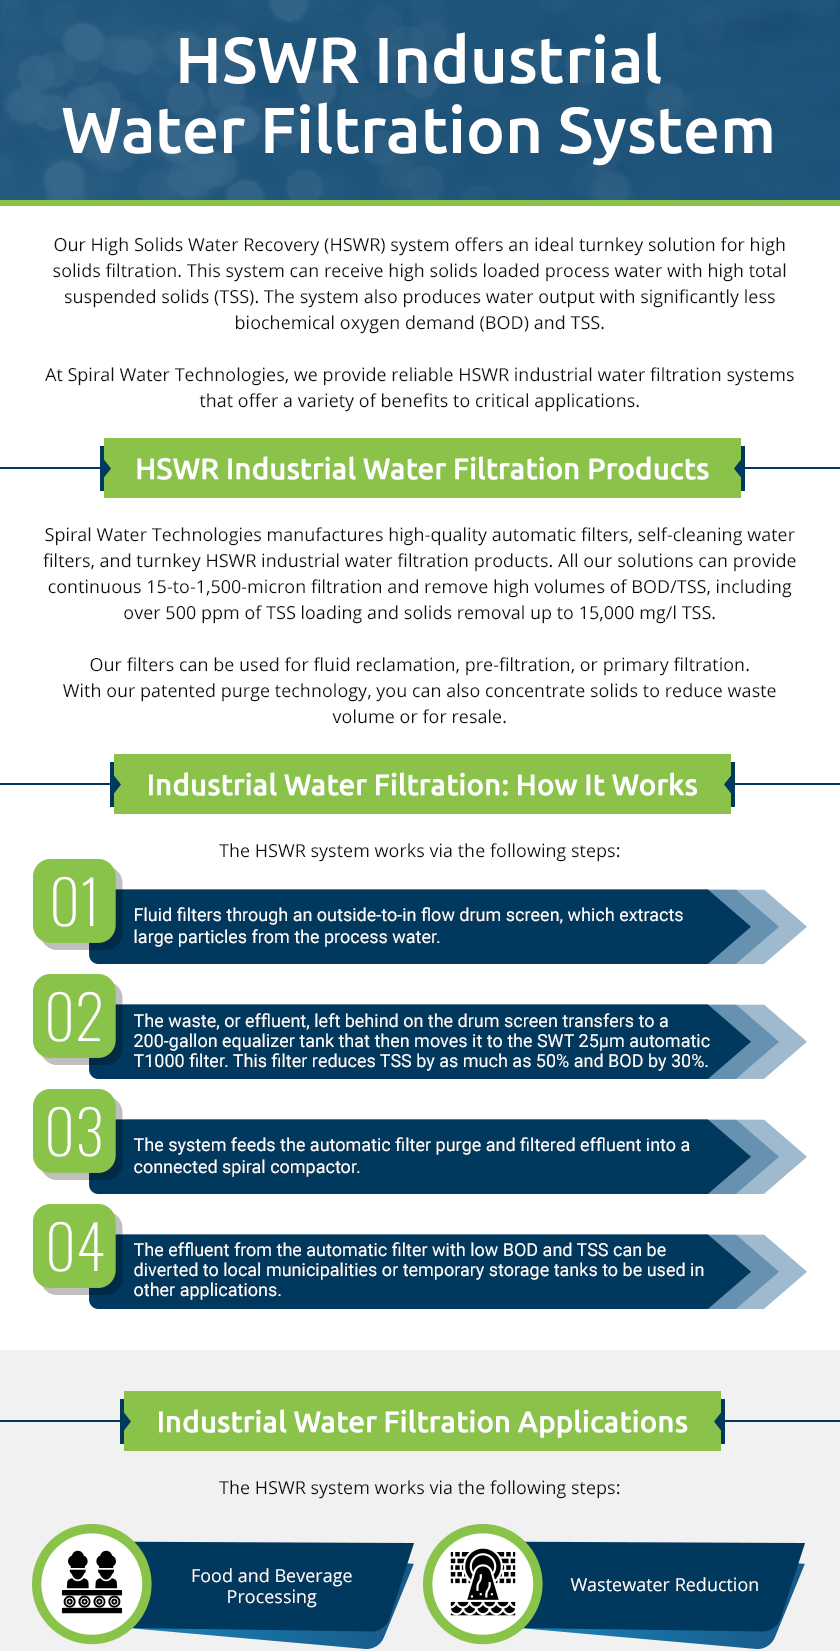 HSWR Industrial Water Filtration System